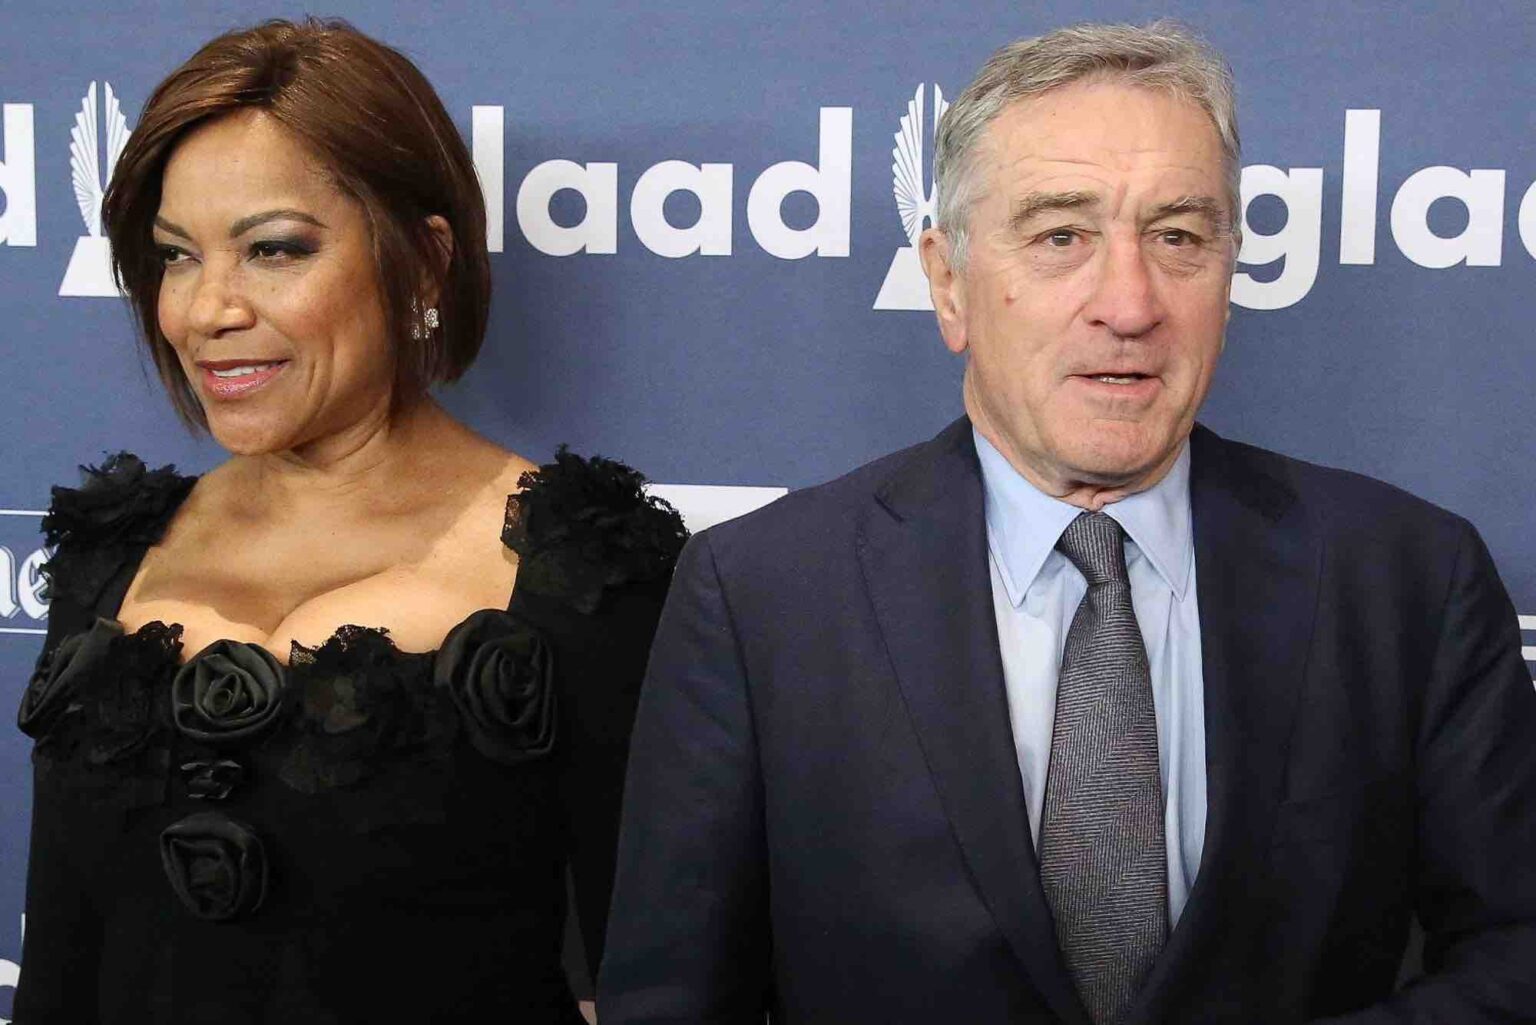 What's going on with Robert De Niro's net worth? Wade into the murky waters of his divorce proceedings with these latest claims.